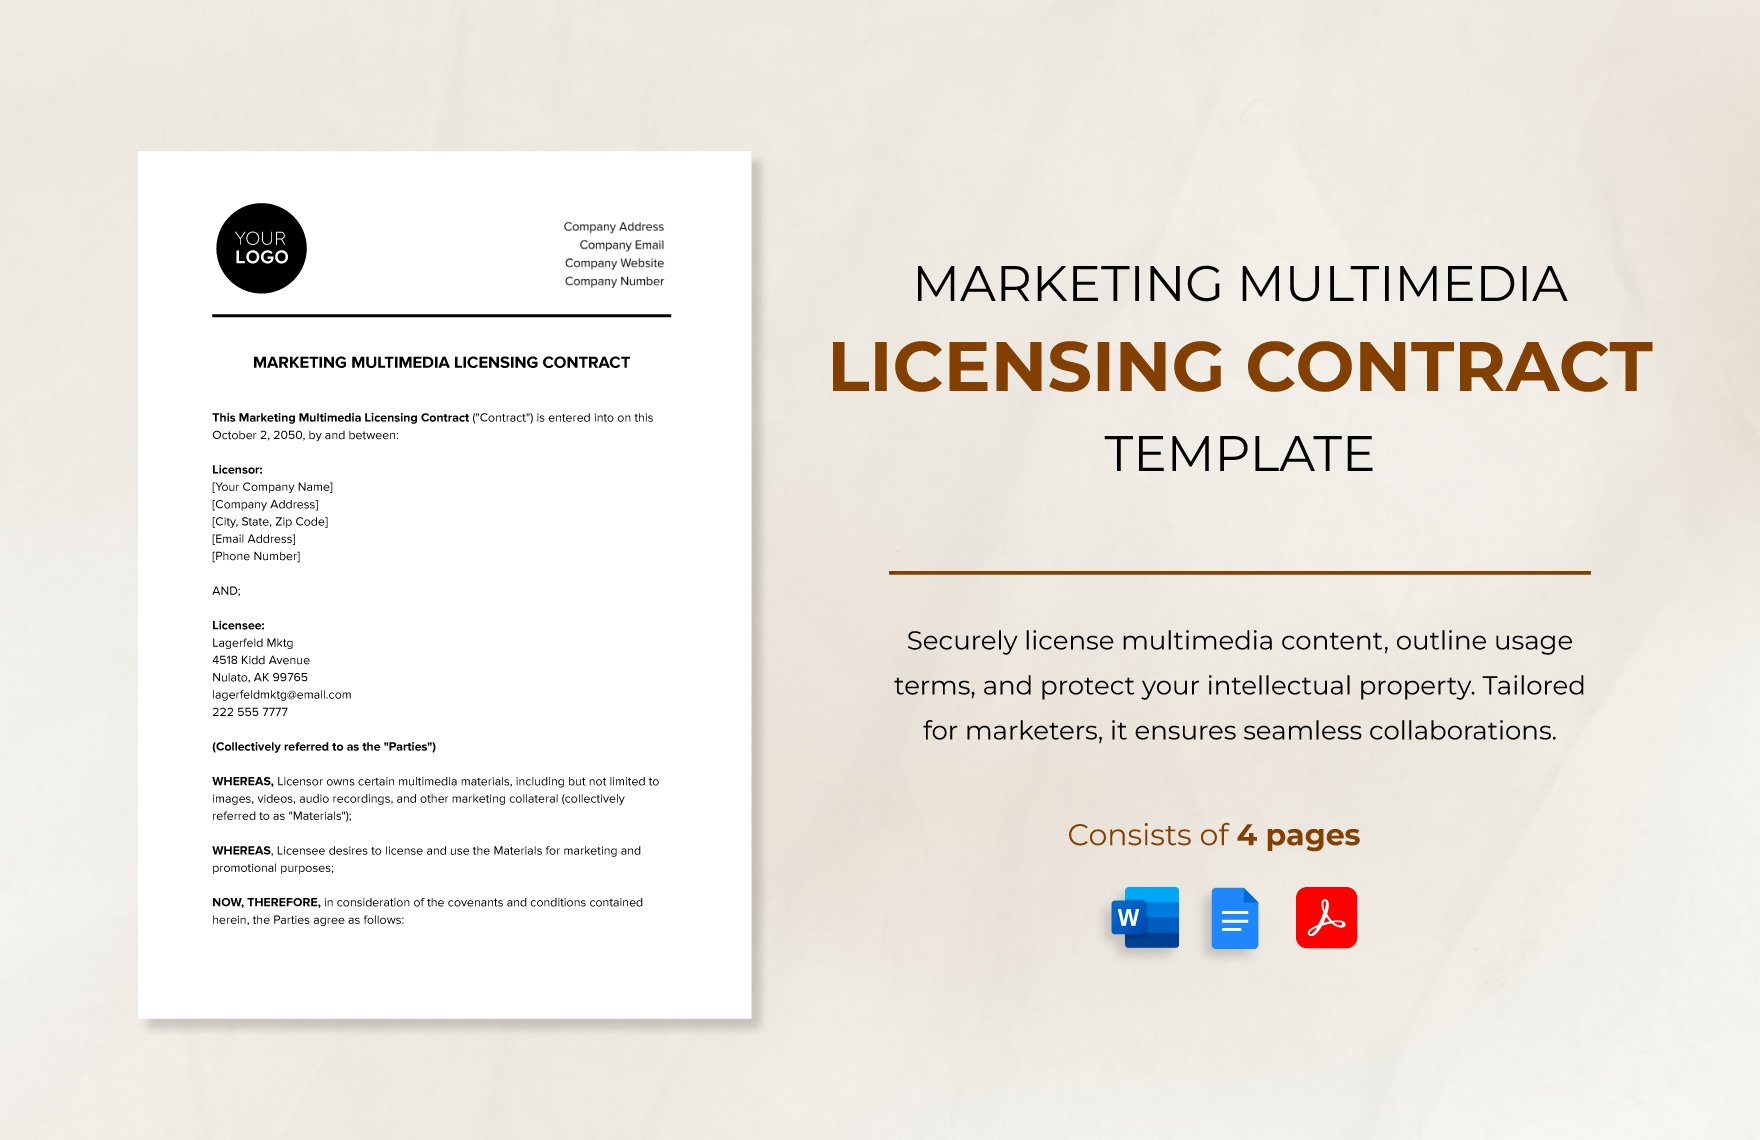 Marketing Multimedia Licensing Contract Template in Word, Google Docs, PDF